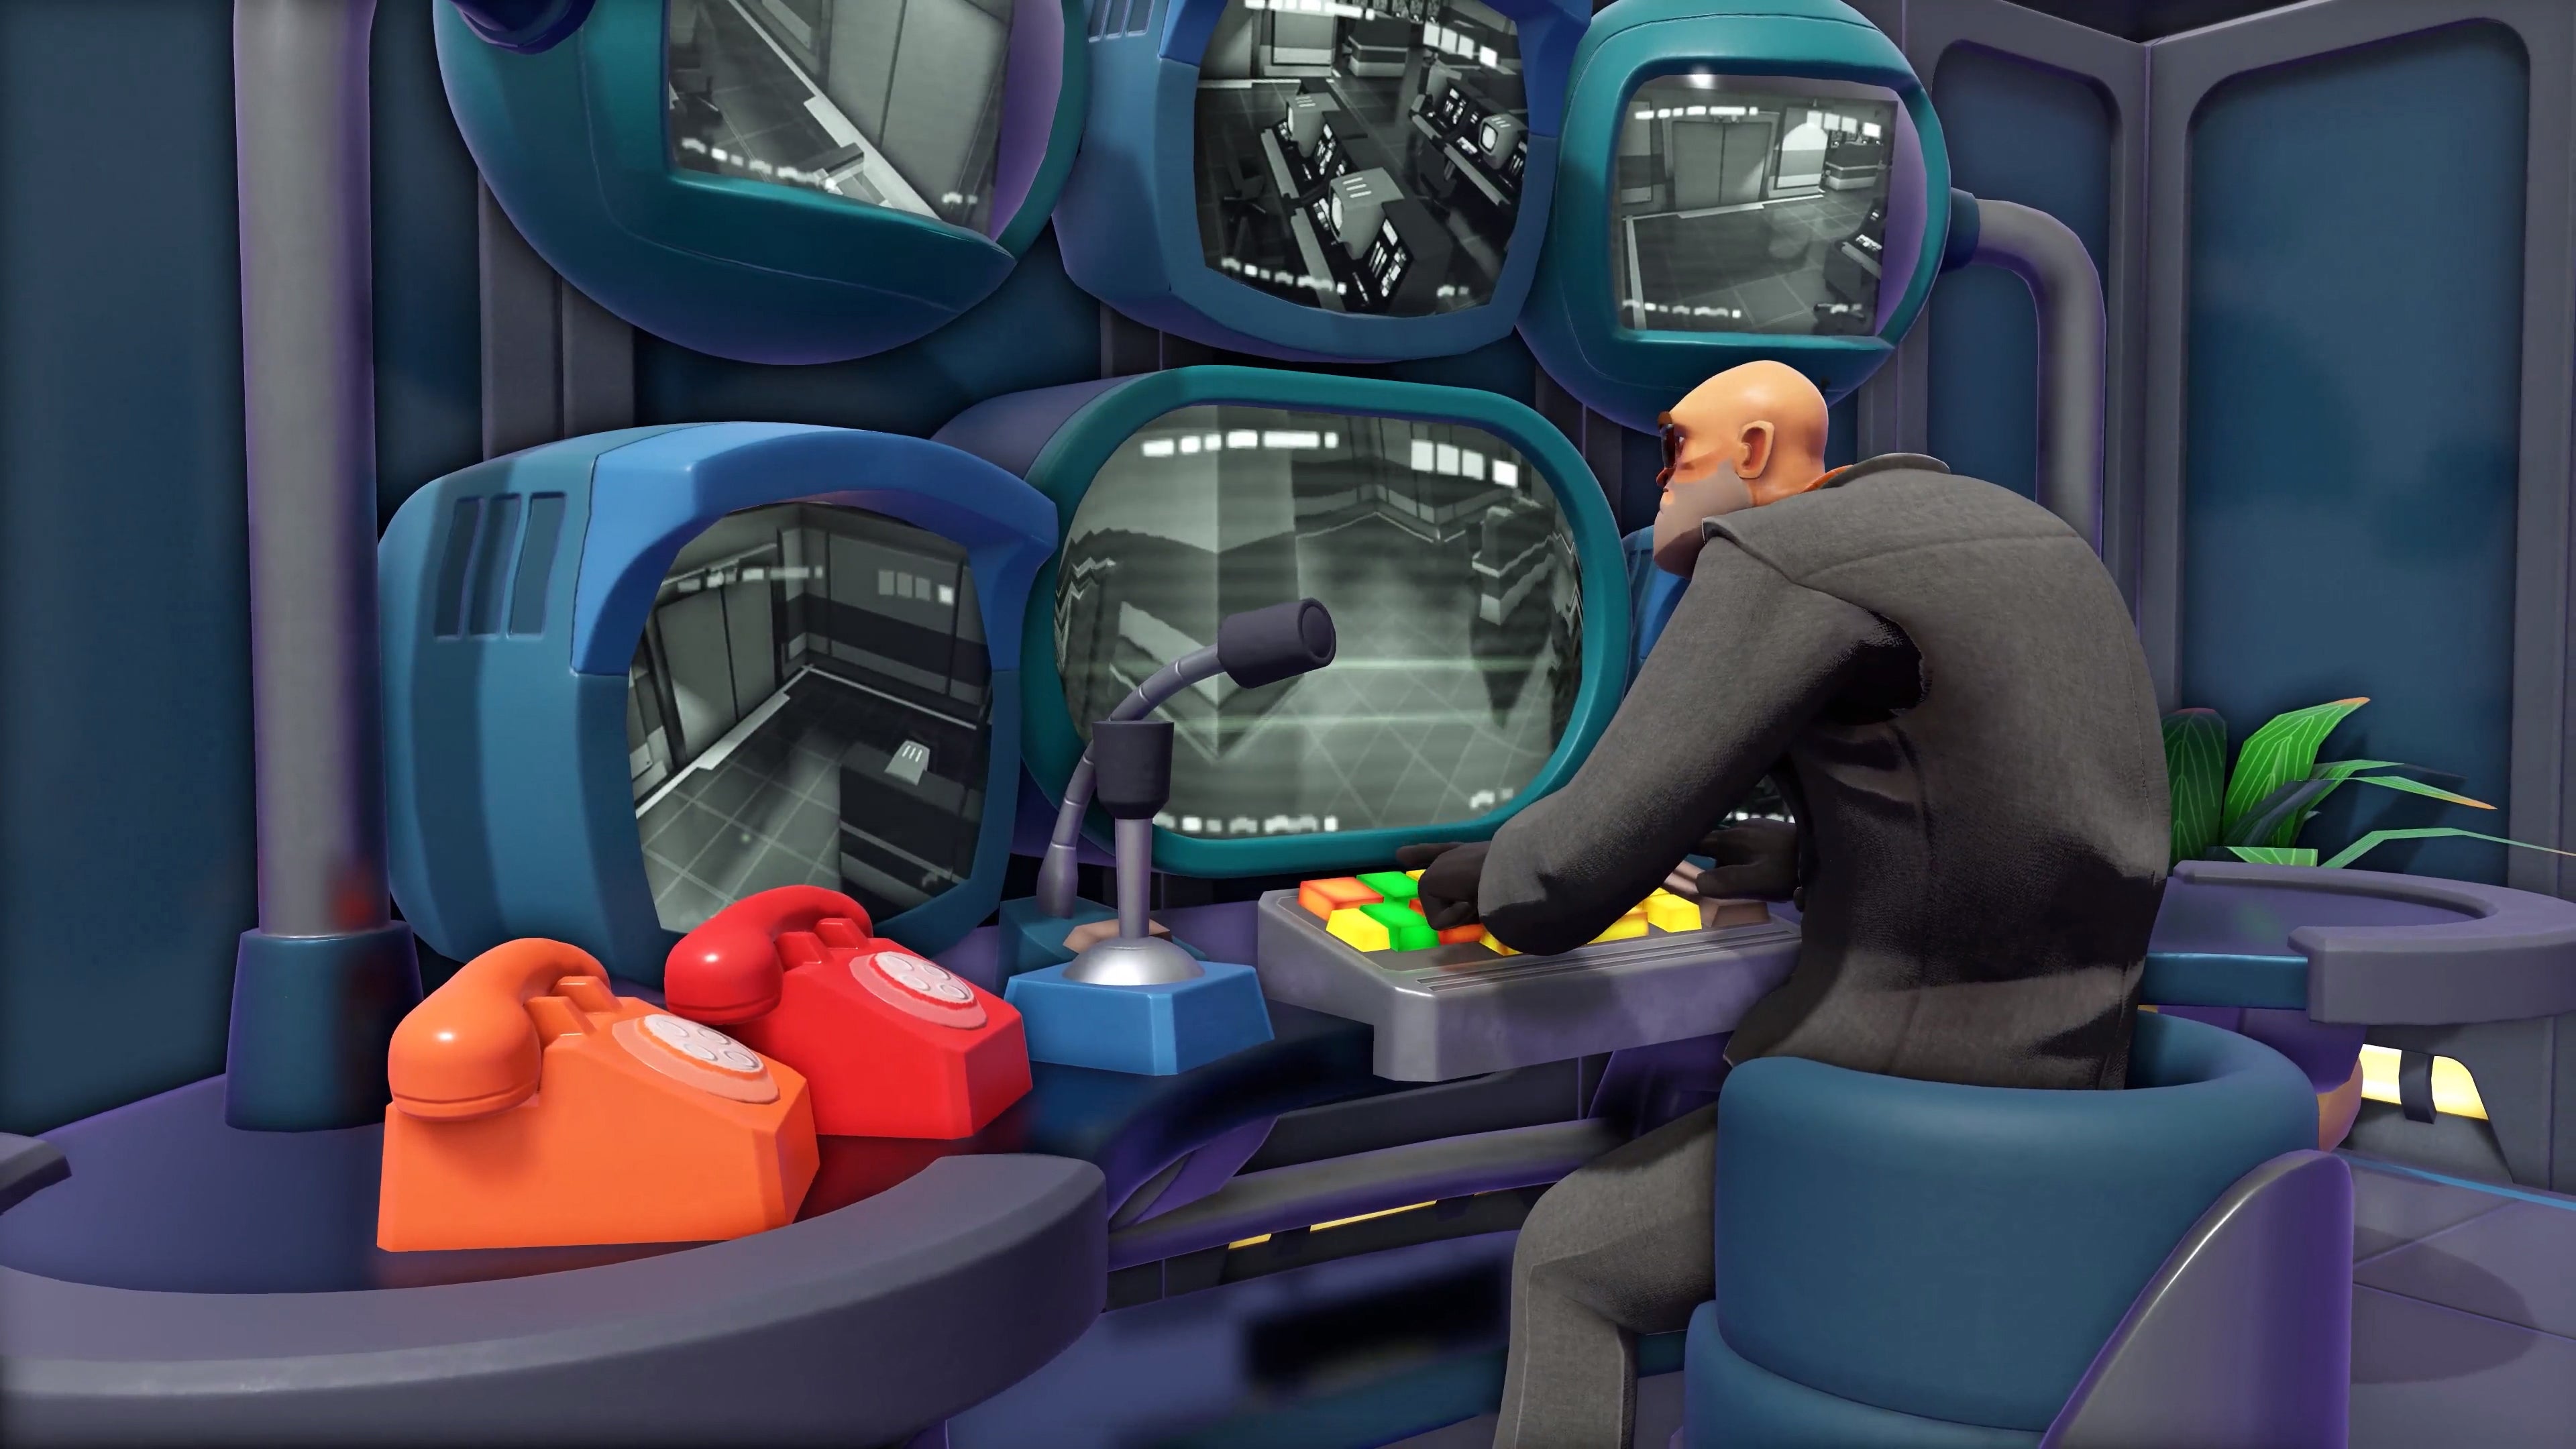 Image for Evil Genius 2 deploys devilish traps and goons in new trailer